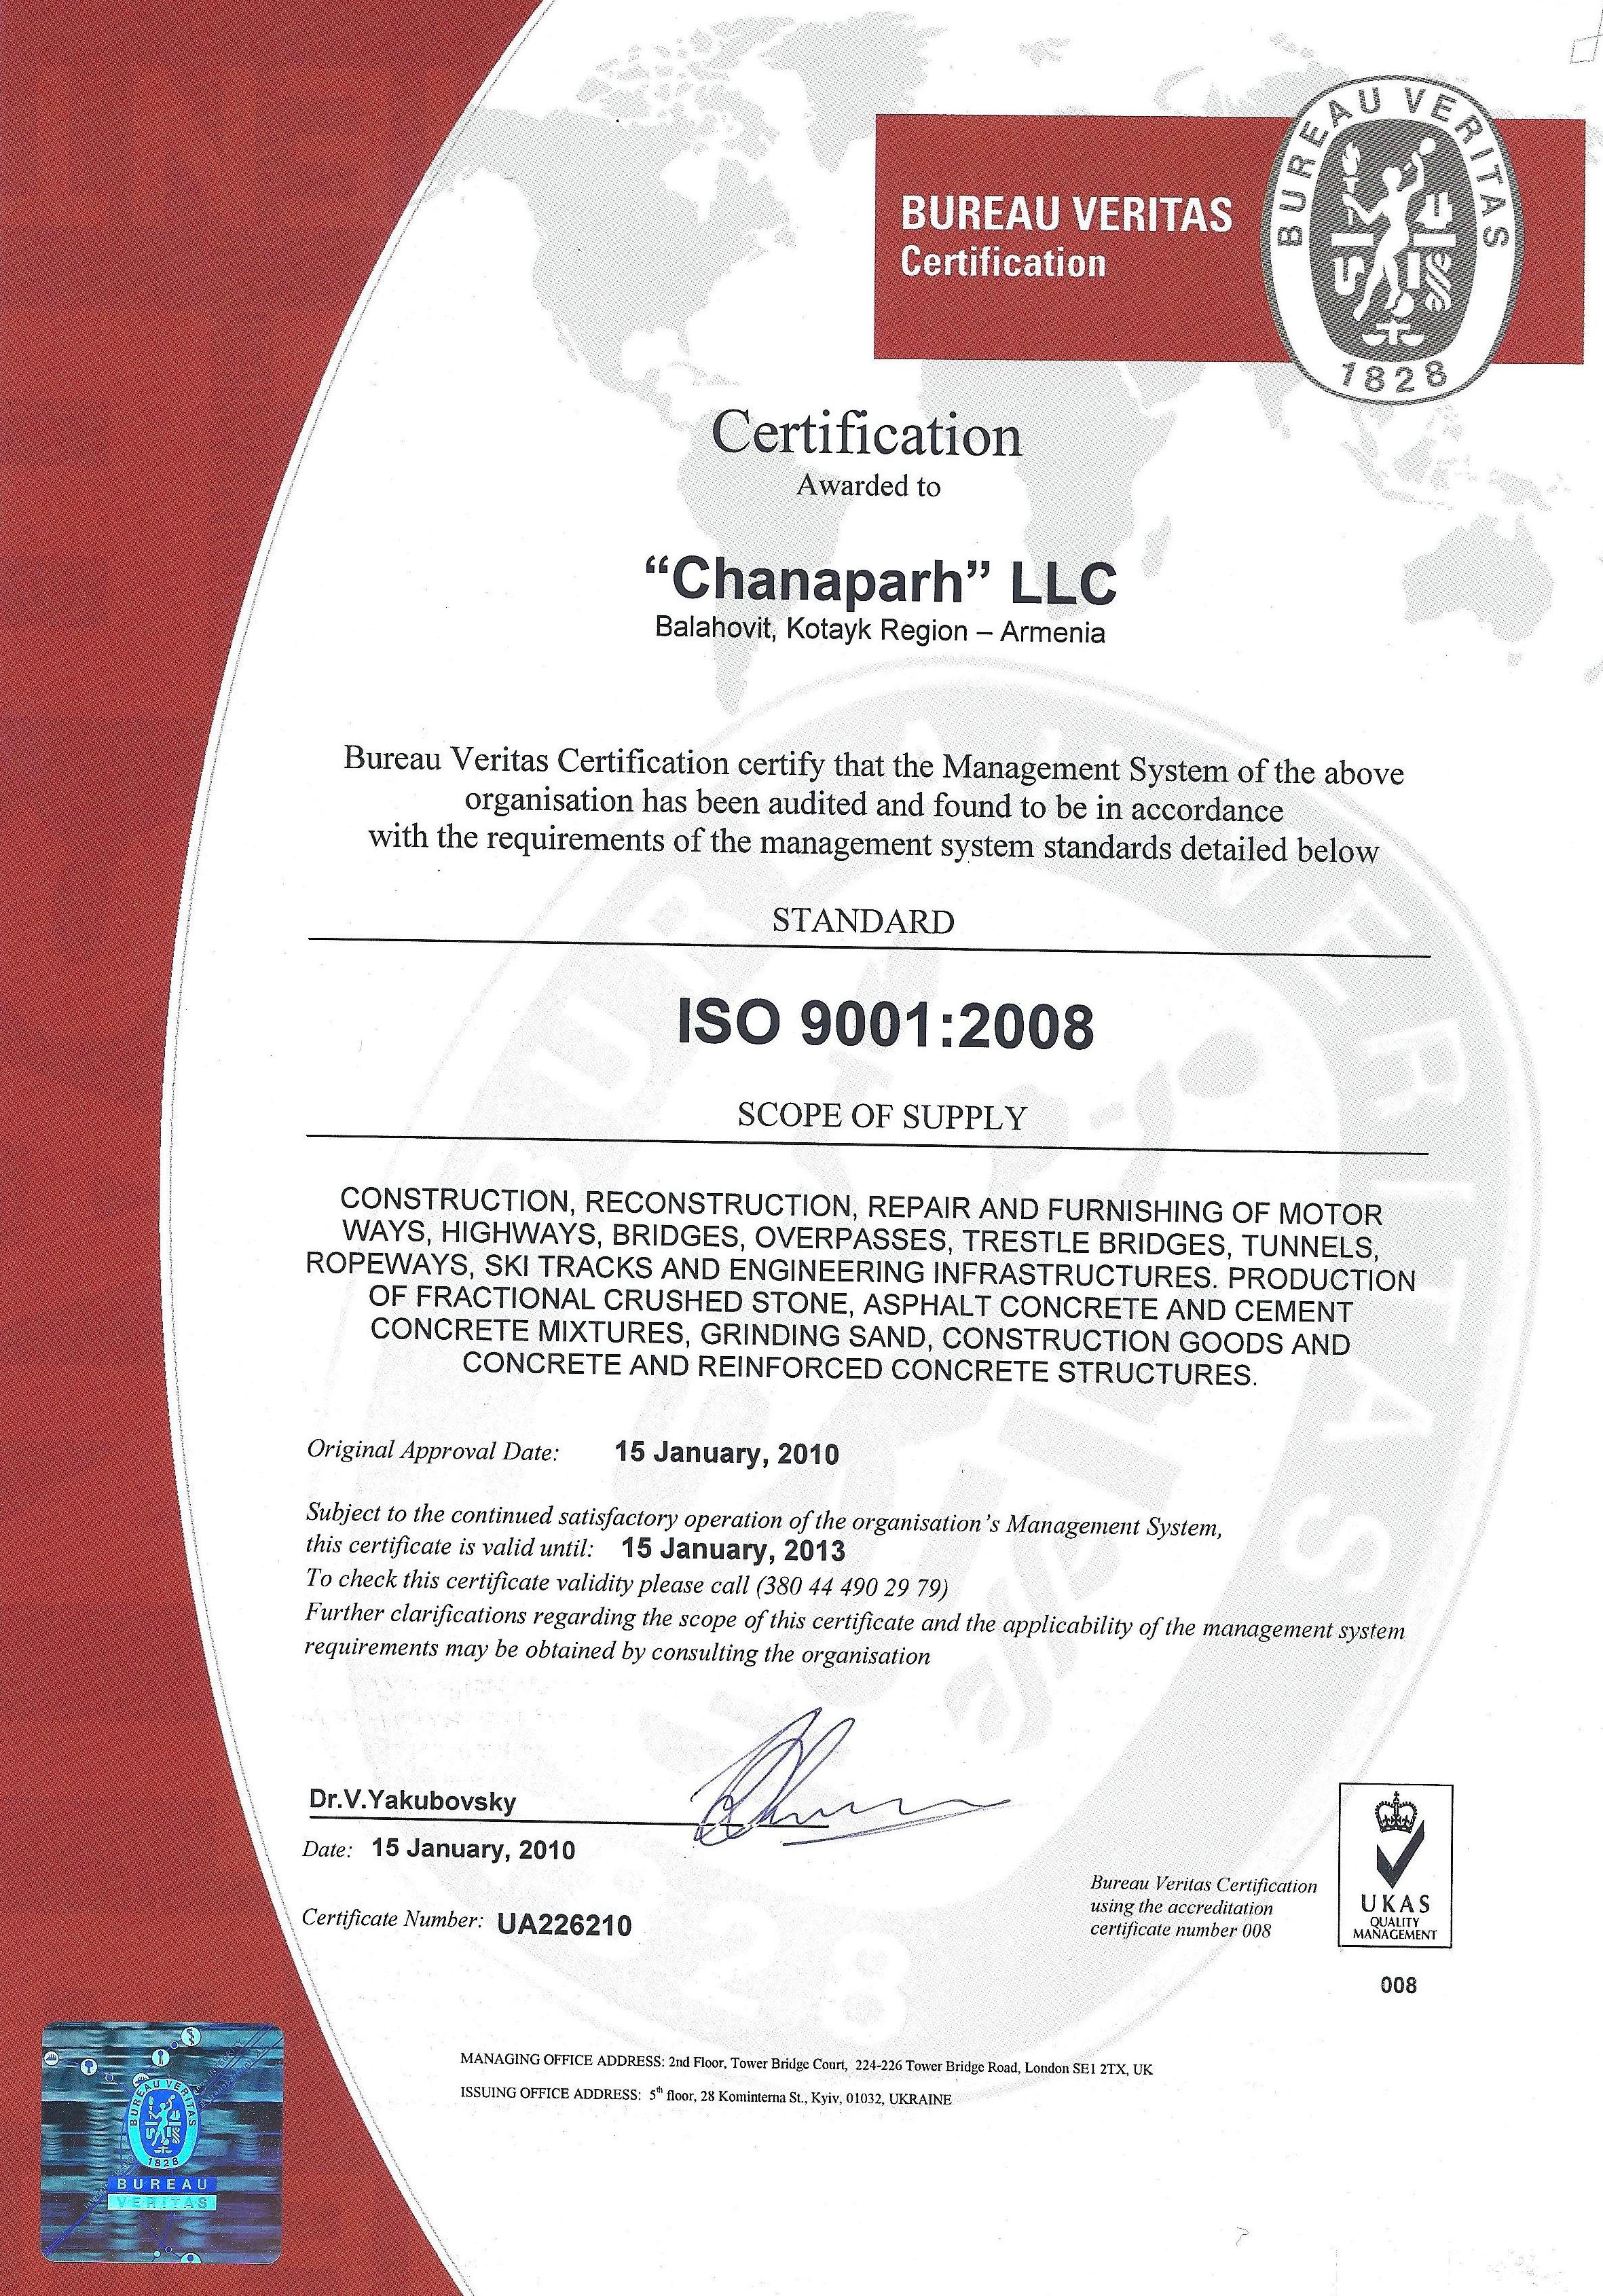 Chanaparh LLC was granted ISO certificate